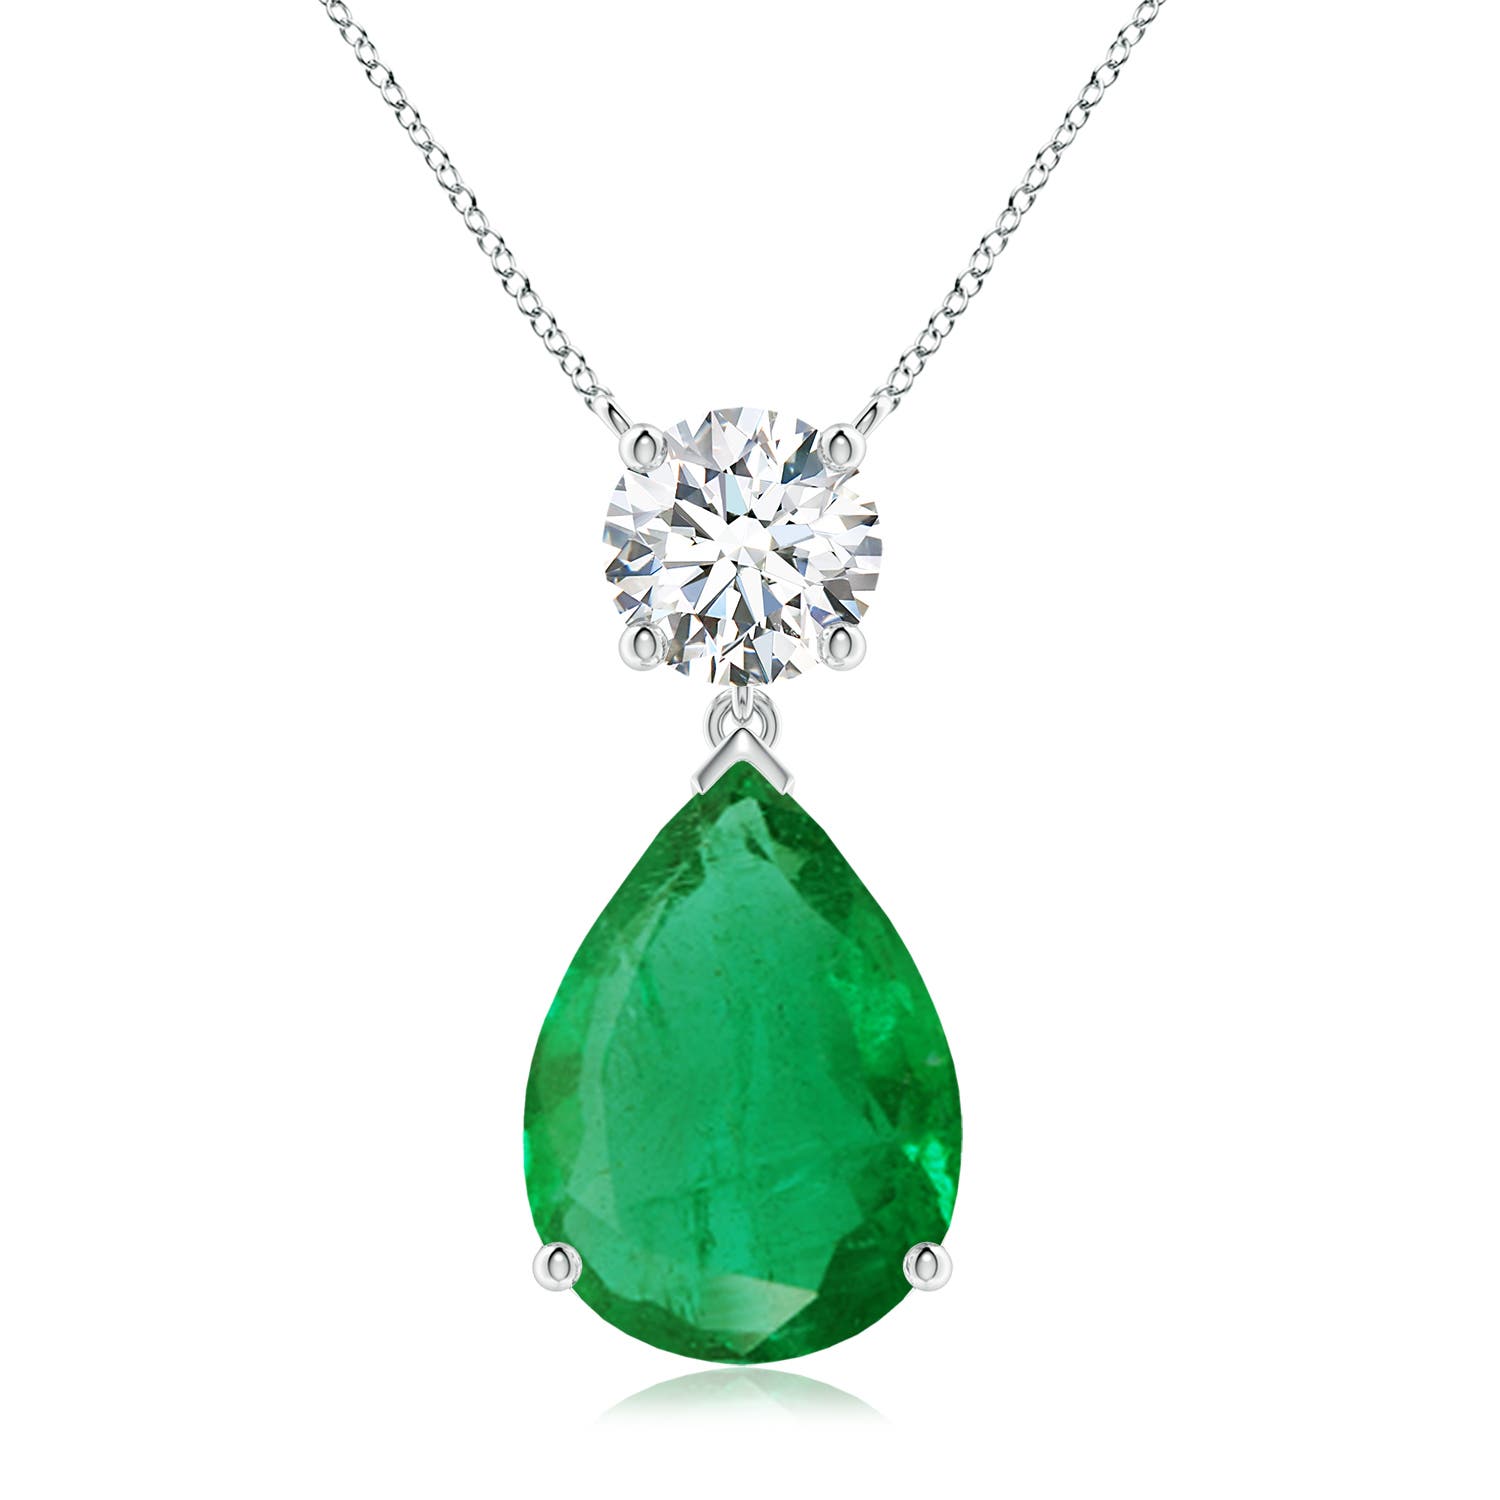 AA - Emerald / 7.6 CT / 14 KT White Gold